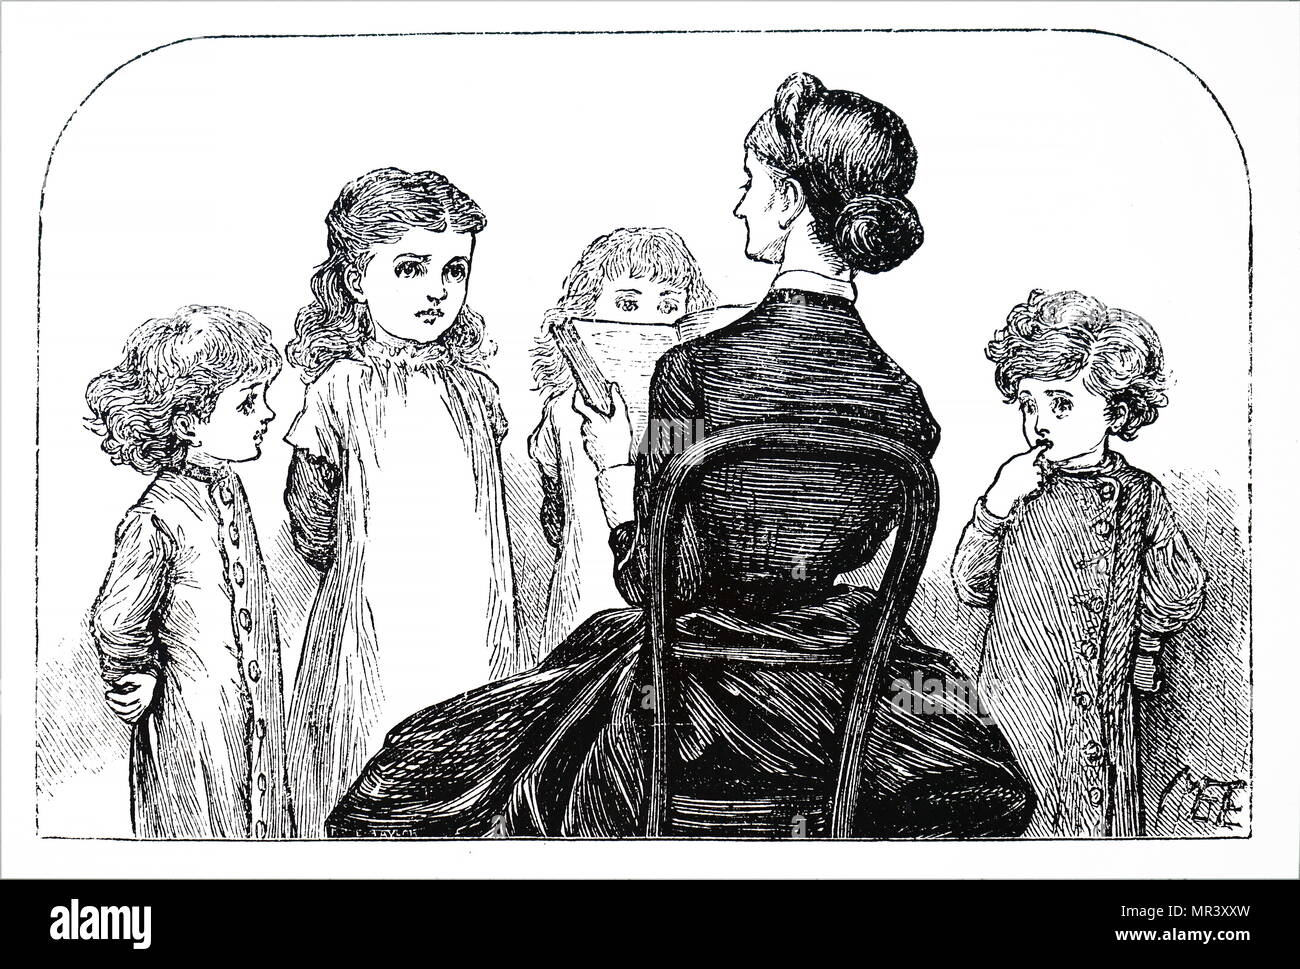 Illustration depicting children listening to their governess reading aloud. Illustrated by Mary Ellen Edwards (1838-1934) an English artist who contributed to many Victorian newspapers and journals, as well as being an illustrator of children's books. Dated 19th century Stock Photo